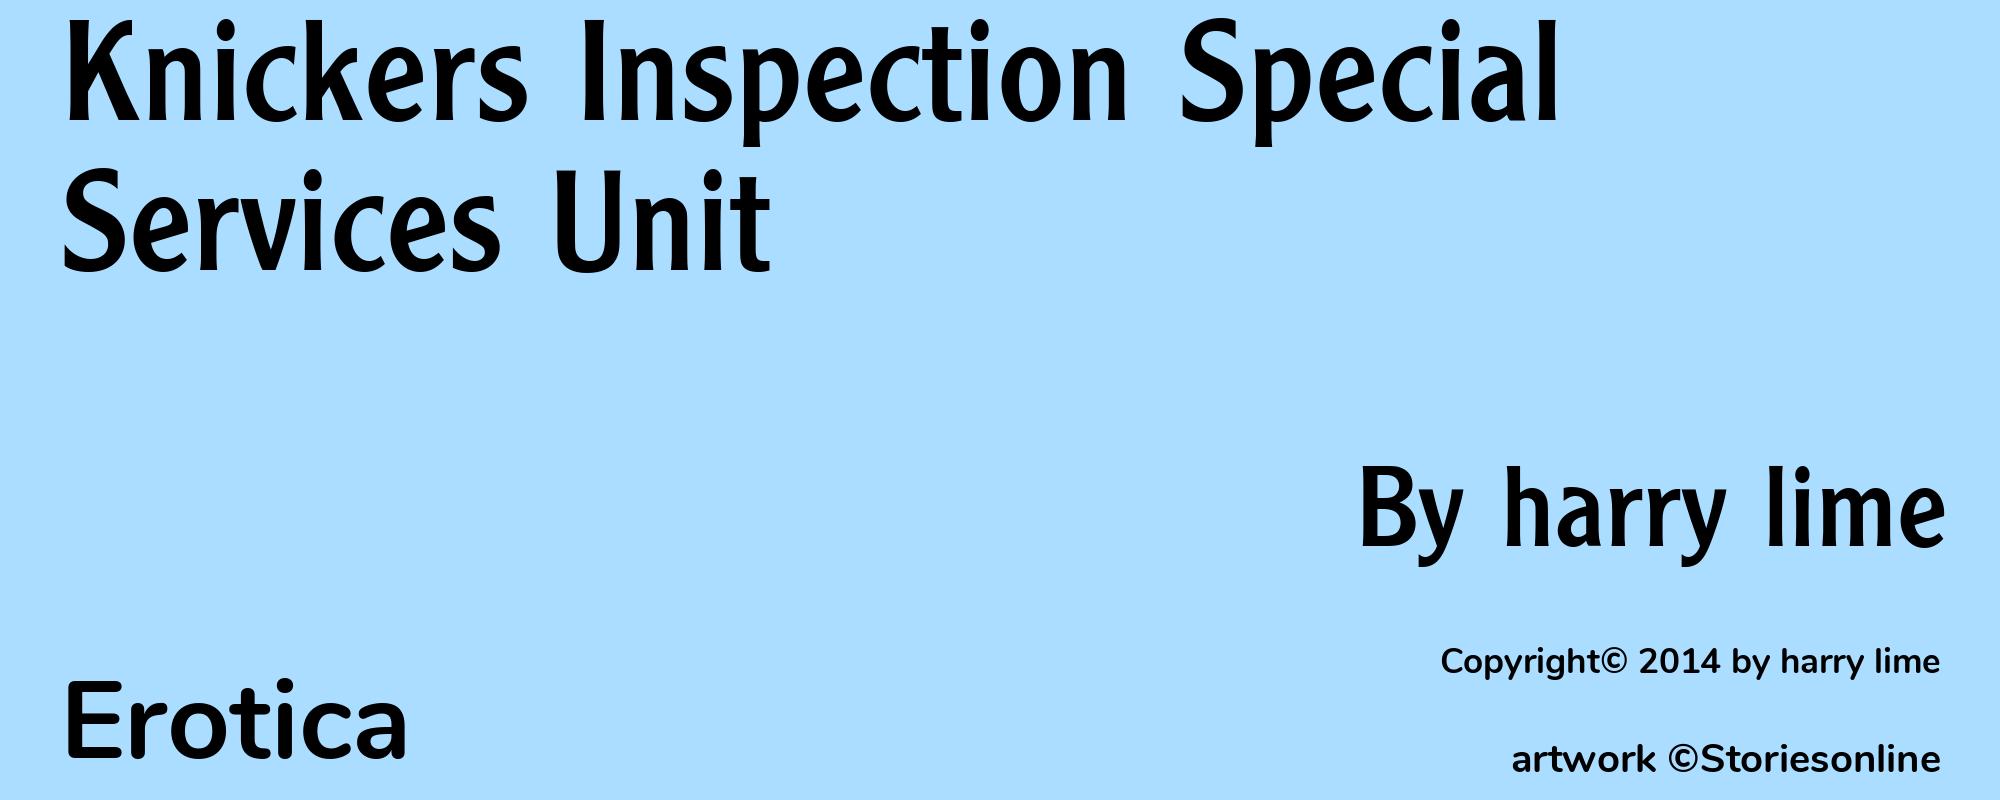 Knickers Inspection Special Services Unit - Cover